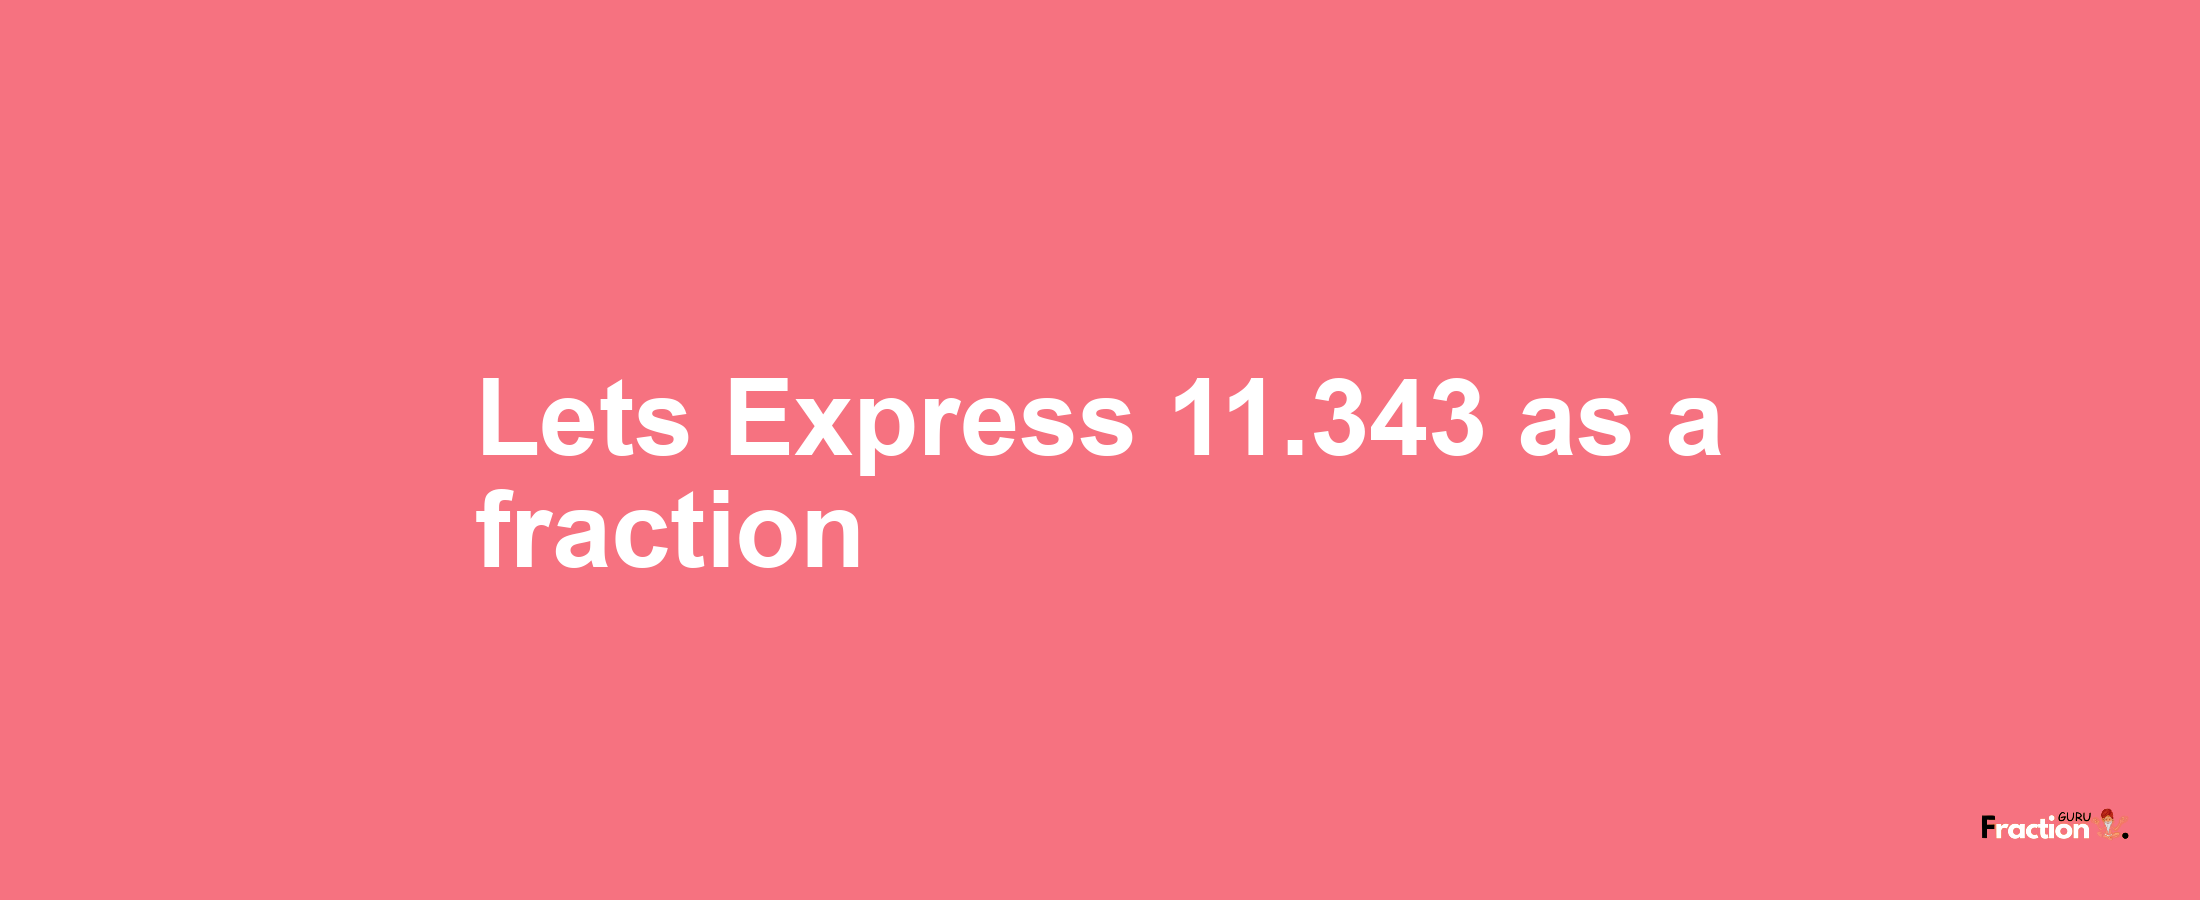 Lets Express 11.343 as afraction